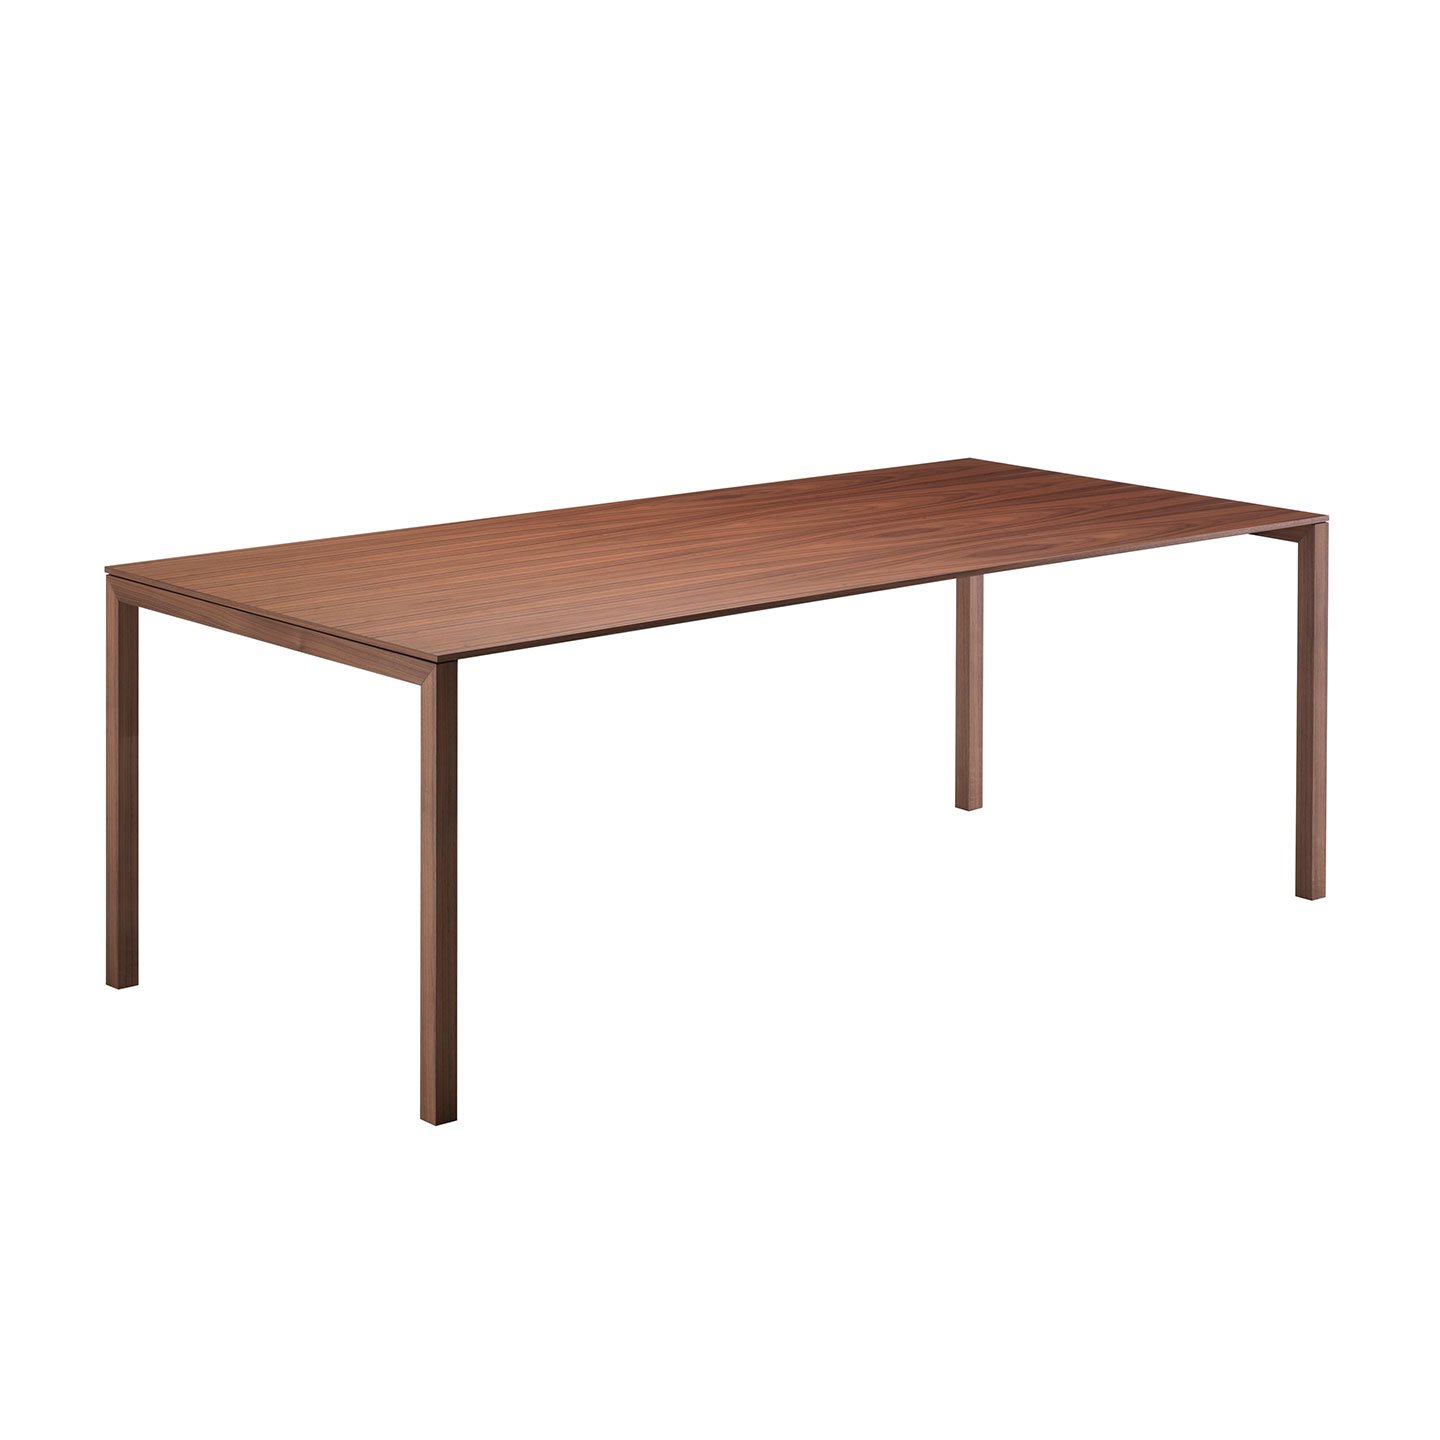 Haworth Naan Table with American walnut rectangular top and 4 legs